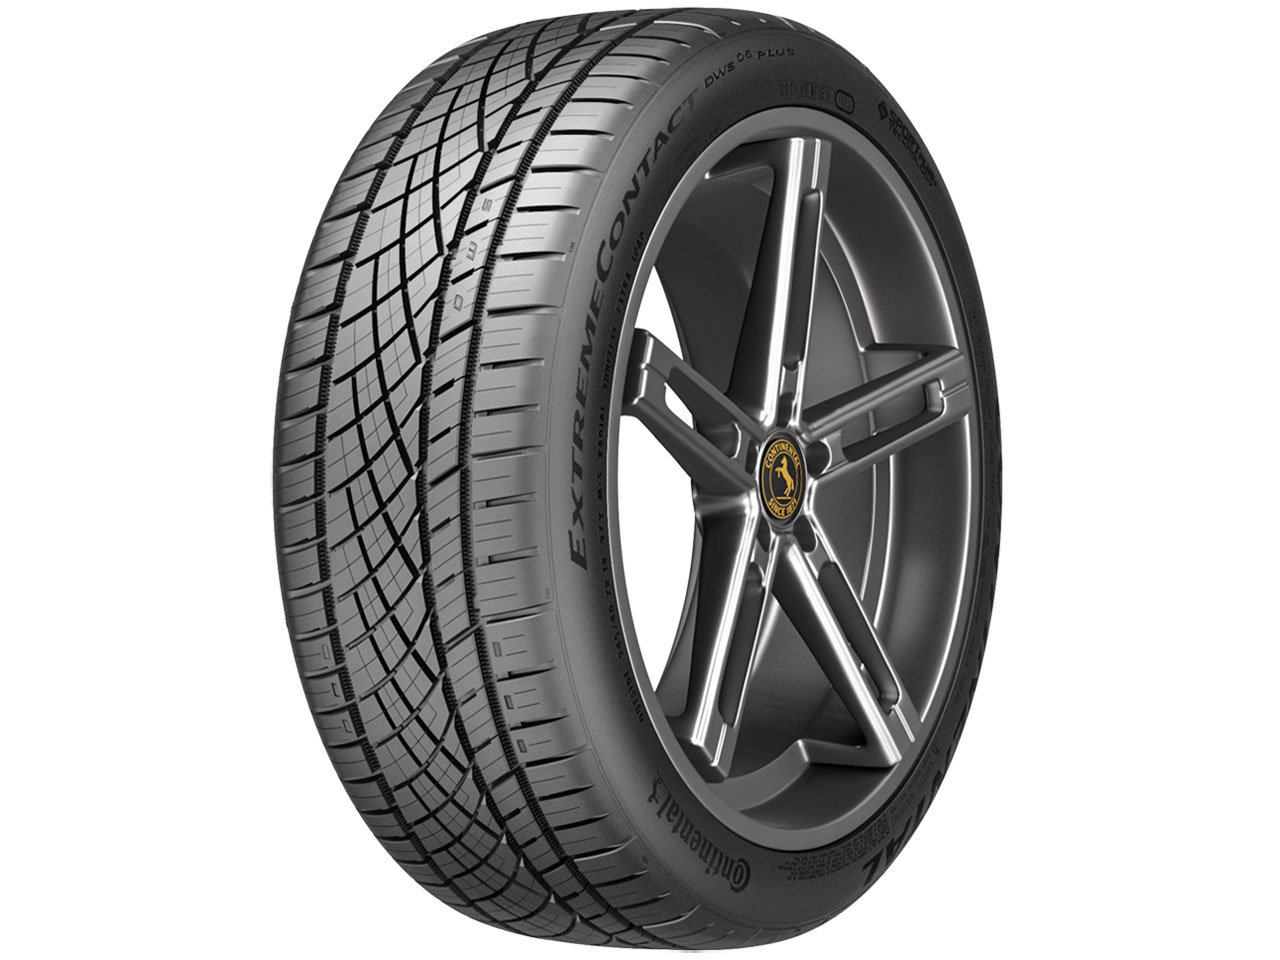 ExtremeContact DWS06 PLUS 225/45ZR18 91Y